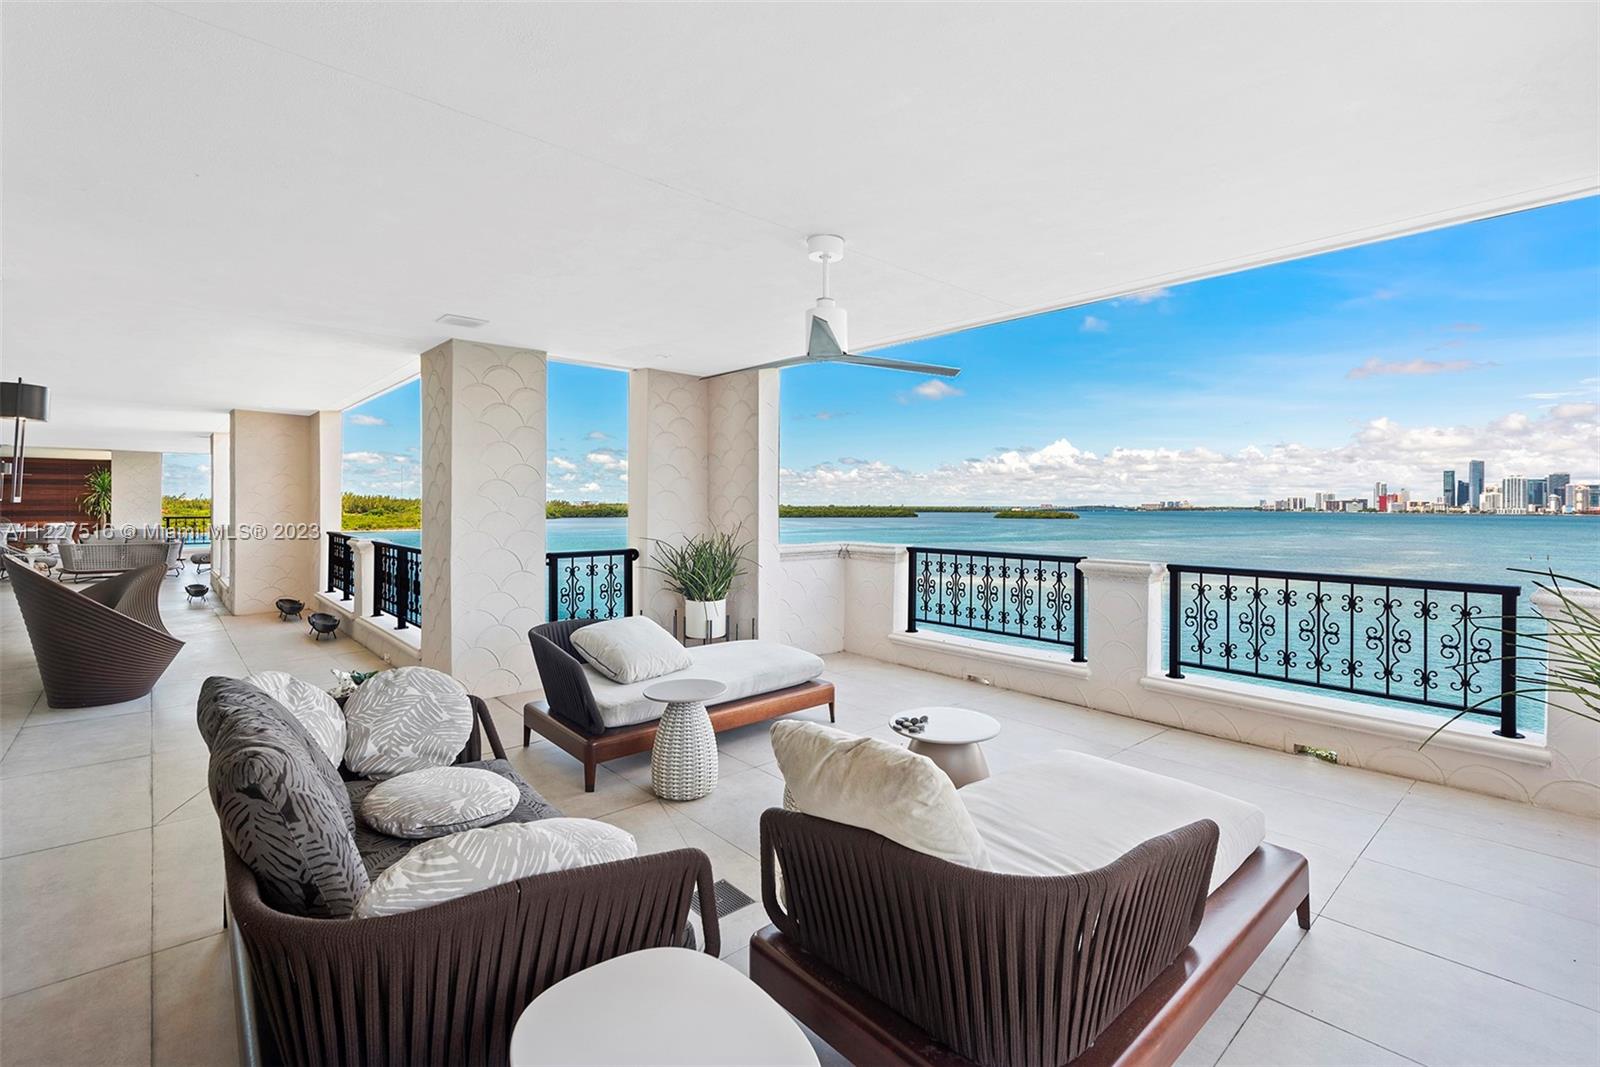 This masterfully crafted unit was been completely renovated and reconfigured into an open-plan, designed and decorated by creative director Sofia Joelsson. This flow-through unit overlooks the Atlantic Ocean, Biscayne Bay and Downtown Miami , it encompasses expansive terraces perfect for entertaining and other outdoor activities. The inspiration for the project was a modern vibe with a focus on art with approximately 6,000 sq ft living area, 4 bedrooms + theater, 4.5 baths, porcelain concrete style floors, open kitchen with postcard views of the Miami Skyline, plus a custom walnut wet bar, wine coolers. fully furnished, principal suite looking straight east for the perfect sunrise and has one of kind master bathroom. Live the Fisher Island lifestyle in this exceptional offering!